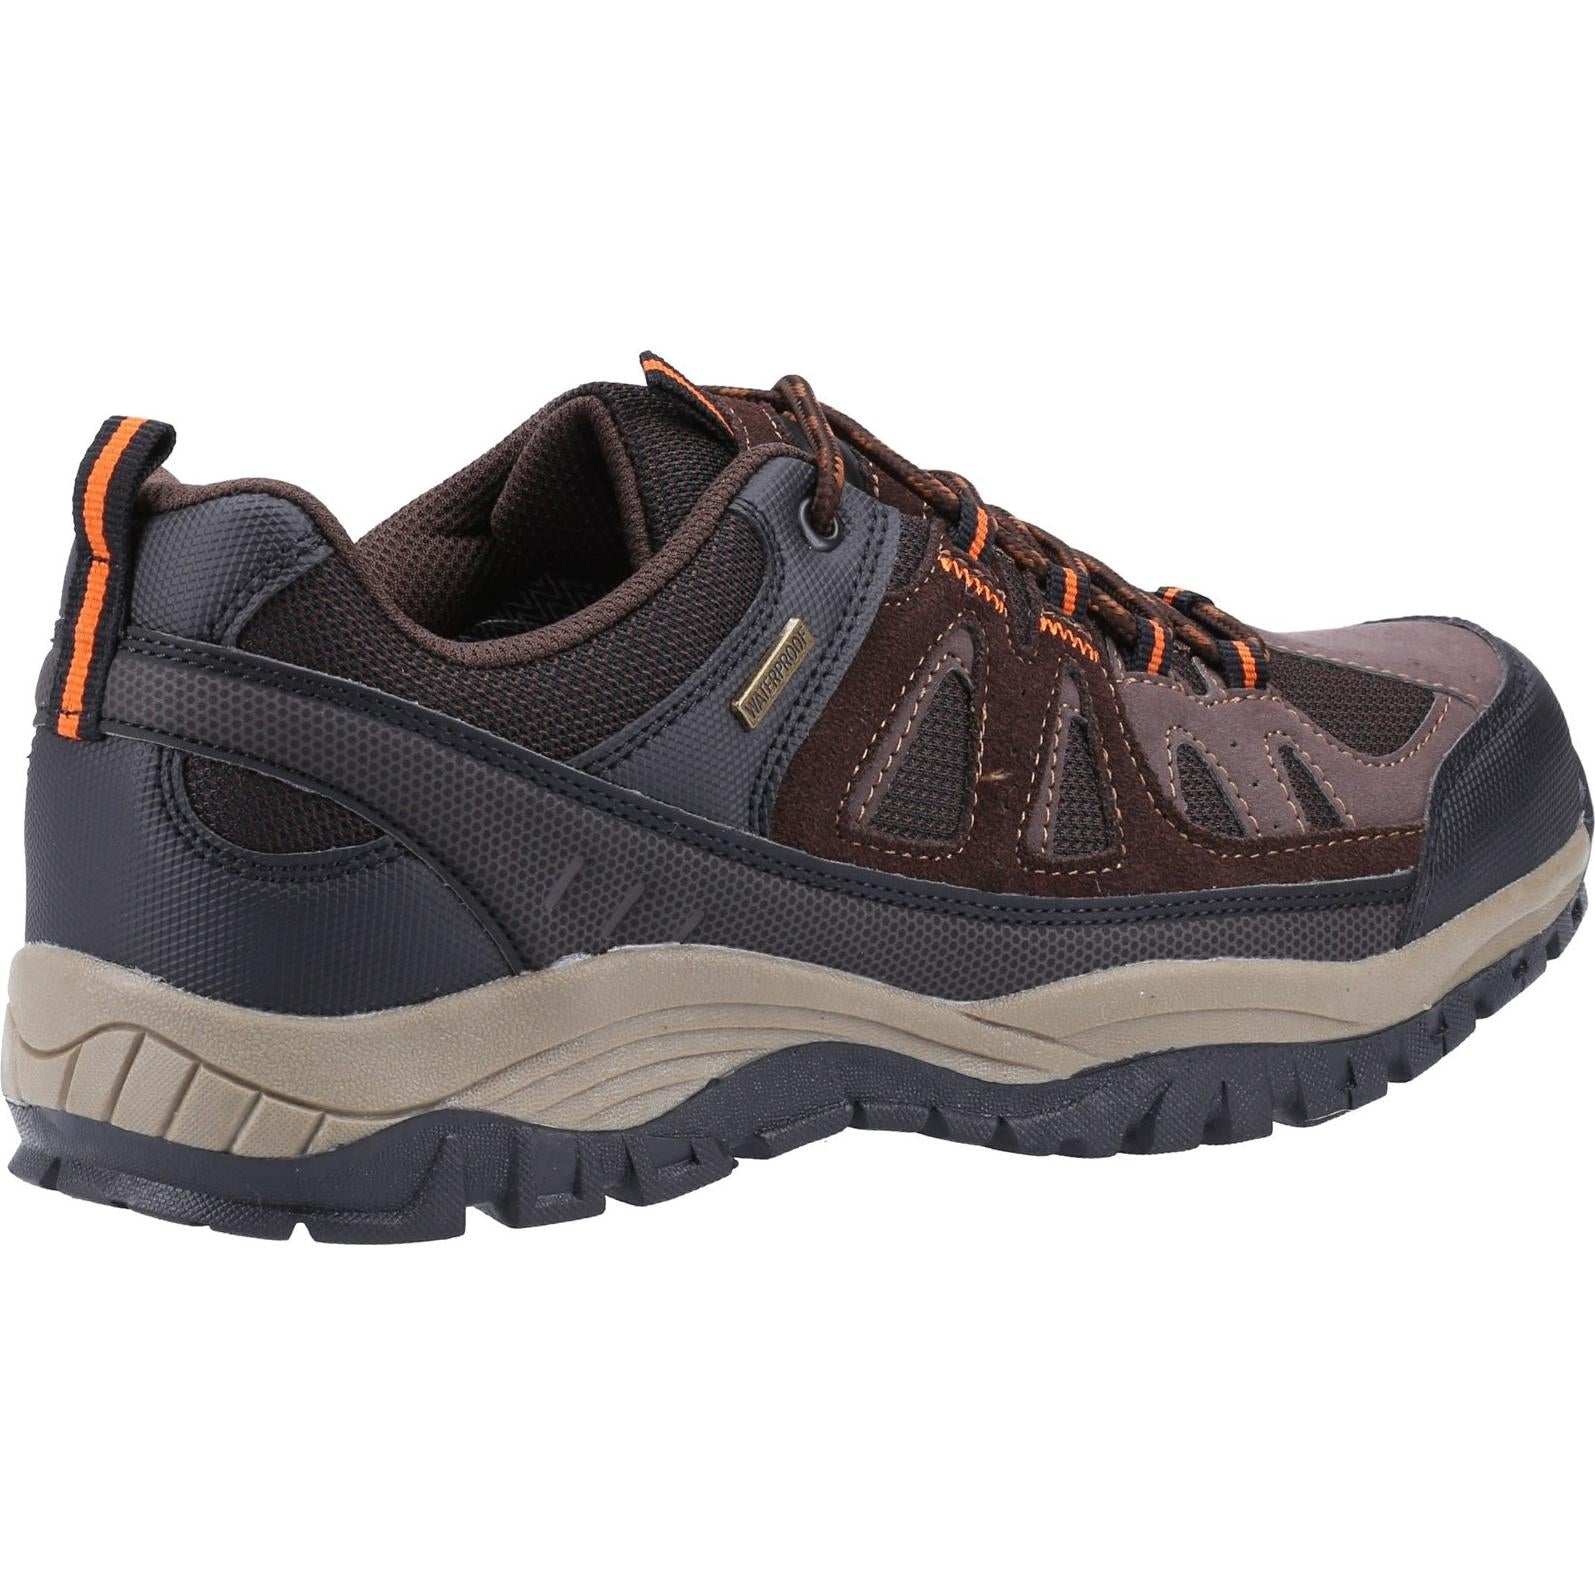 Cotswold Maisemore Low Hiking Boot